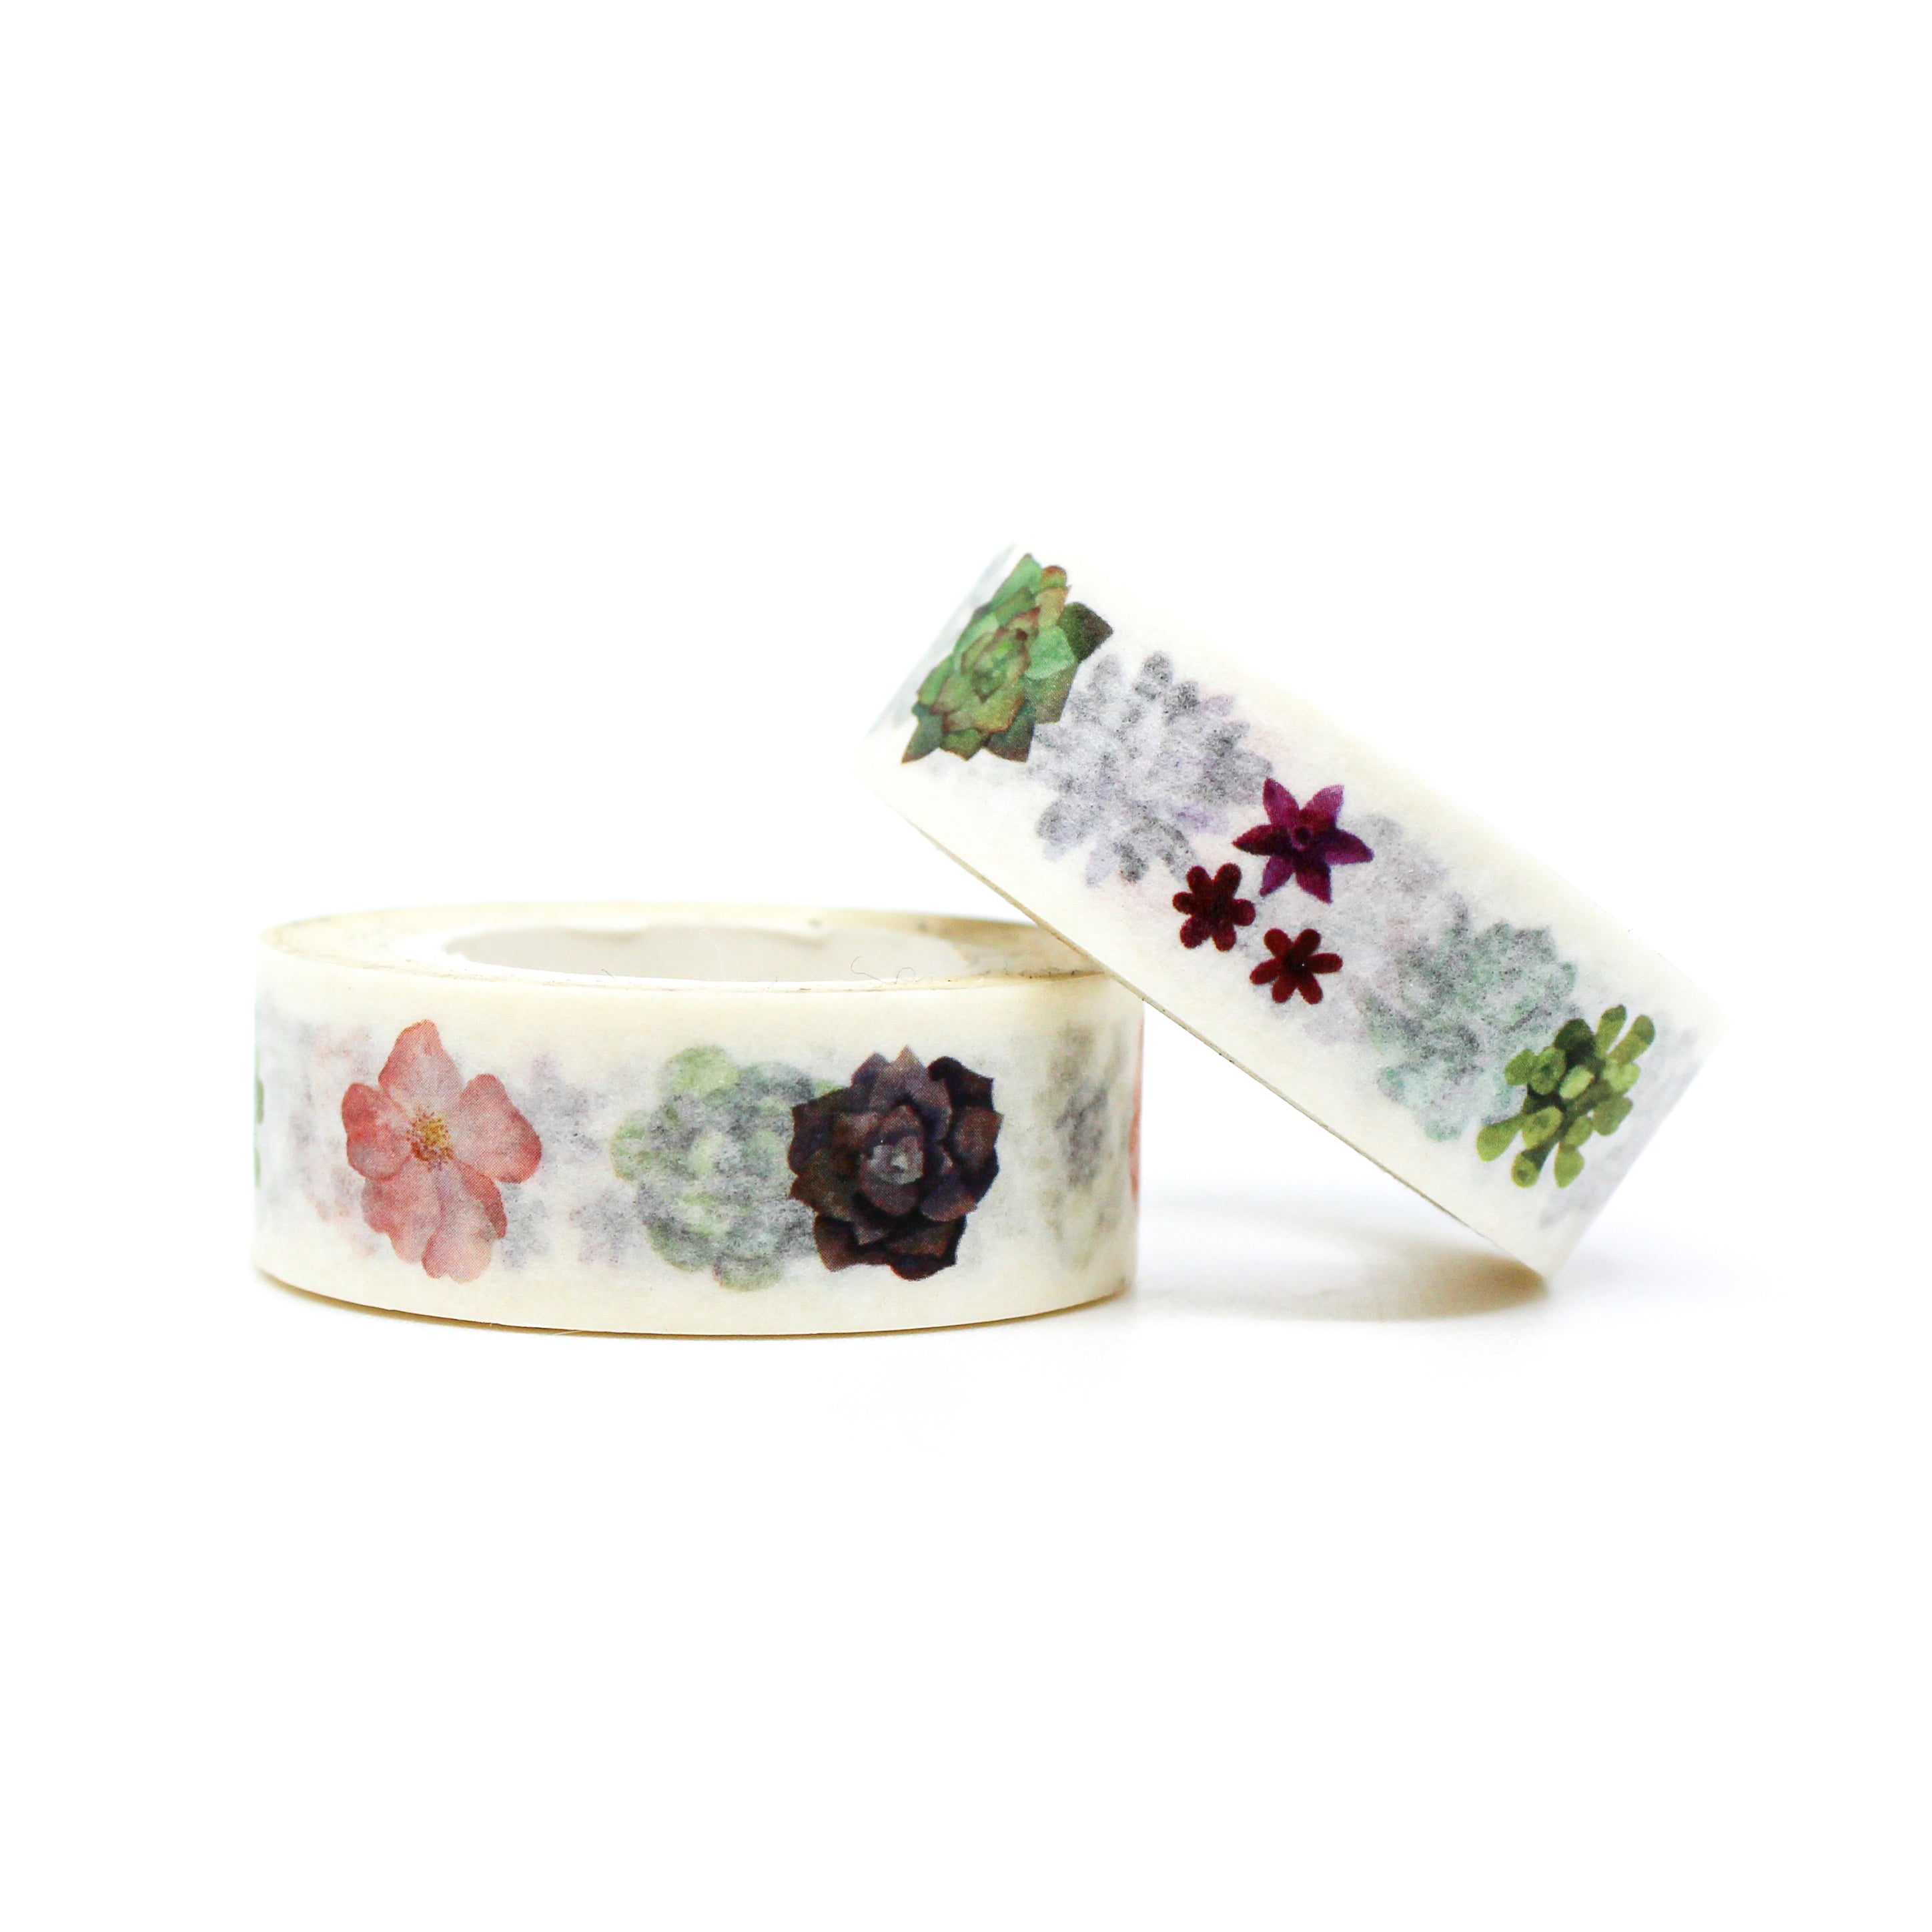 This is a cute picture of cactus washi tapes from BBB Supplies Craft Shop